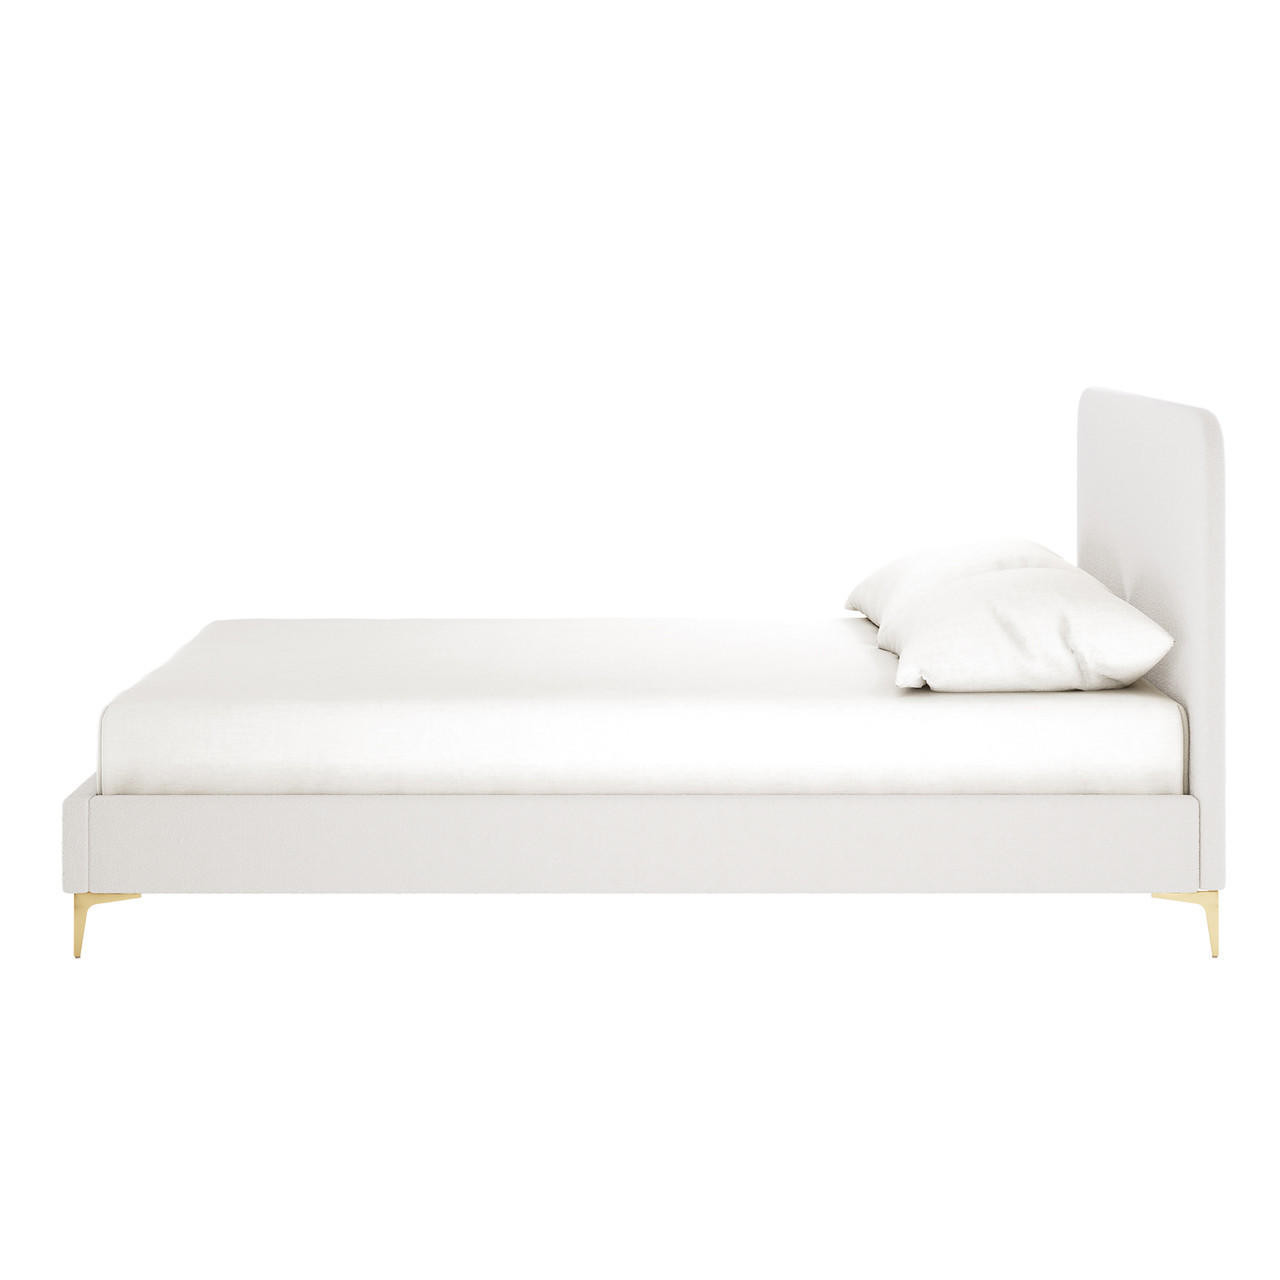 Cammie Boucle Queen Bed Frame - Cream White